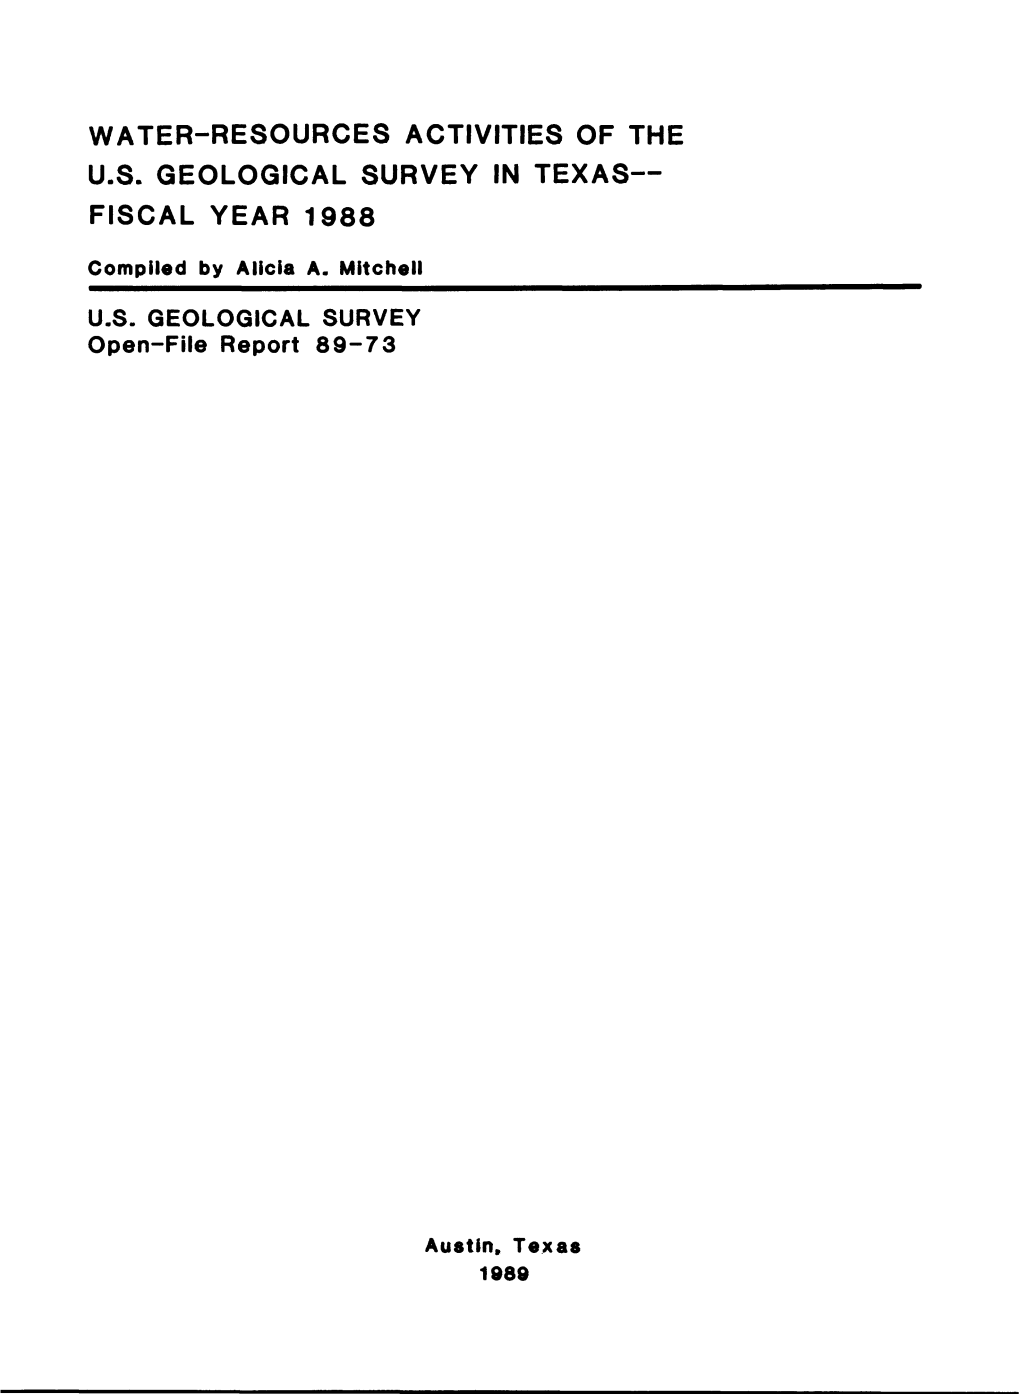 Water-Resources Activities of the U.S. Geological Survey in Texas-­ Fiscal Year 1988